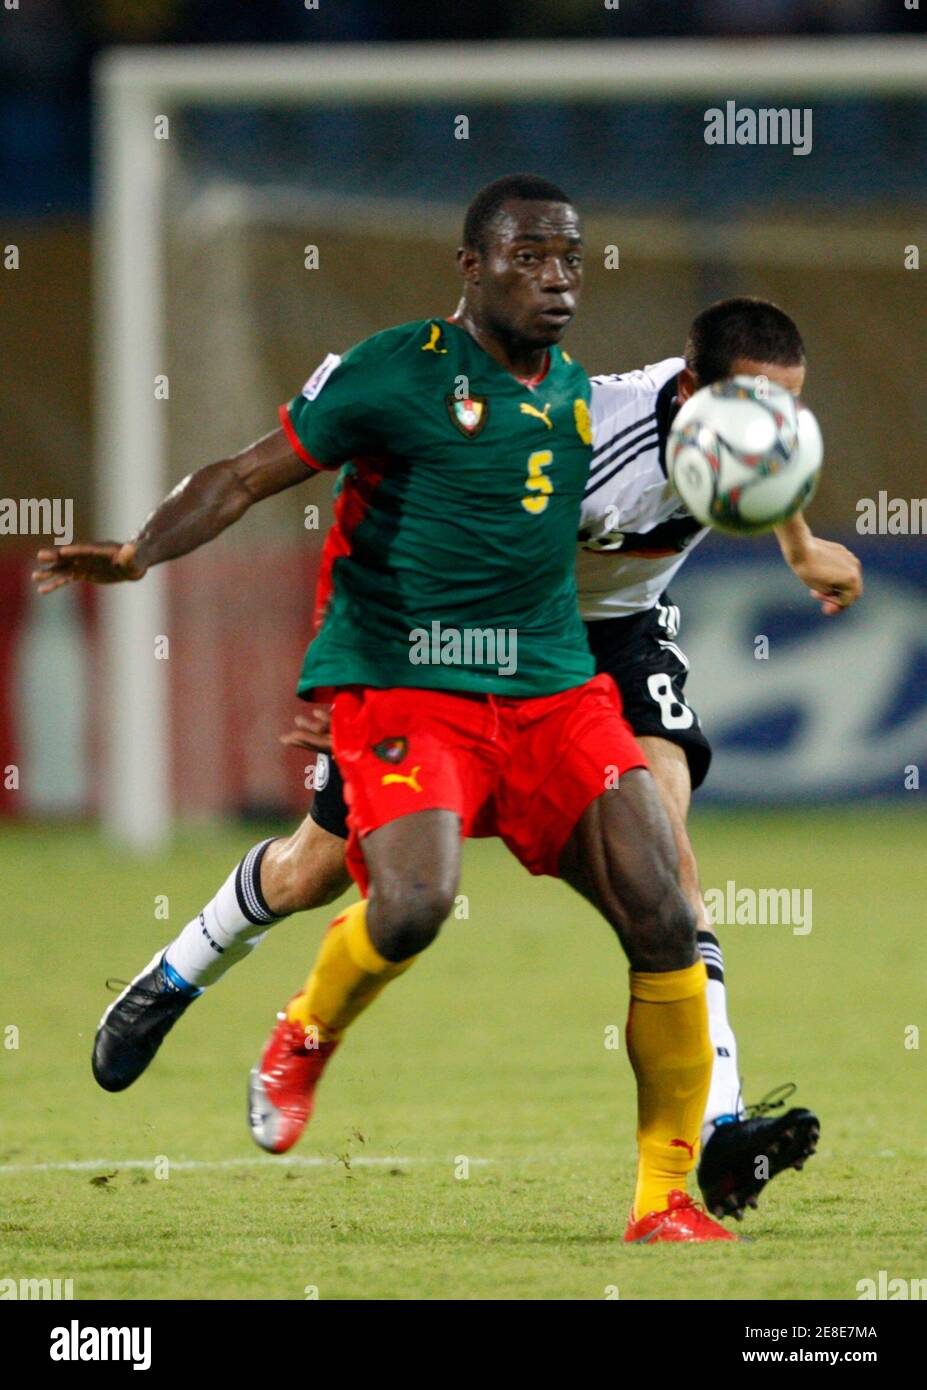 Mario Vrancic of Germany (R) challenges Enow Tabot of Cameroon (L) during their FIFA U-20 World Cup group C soccer match in Ismailia October 2, 2009. REUTERS/Marko Djurica (EGYPT SPORT SOCCER) Stock Photo